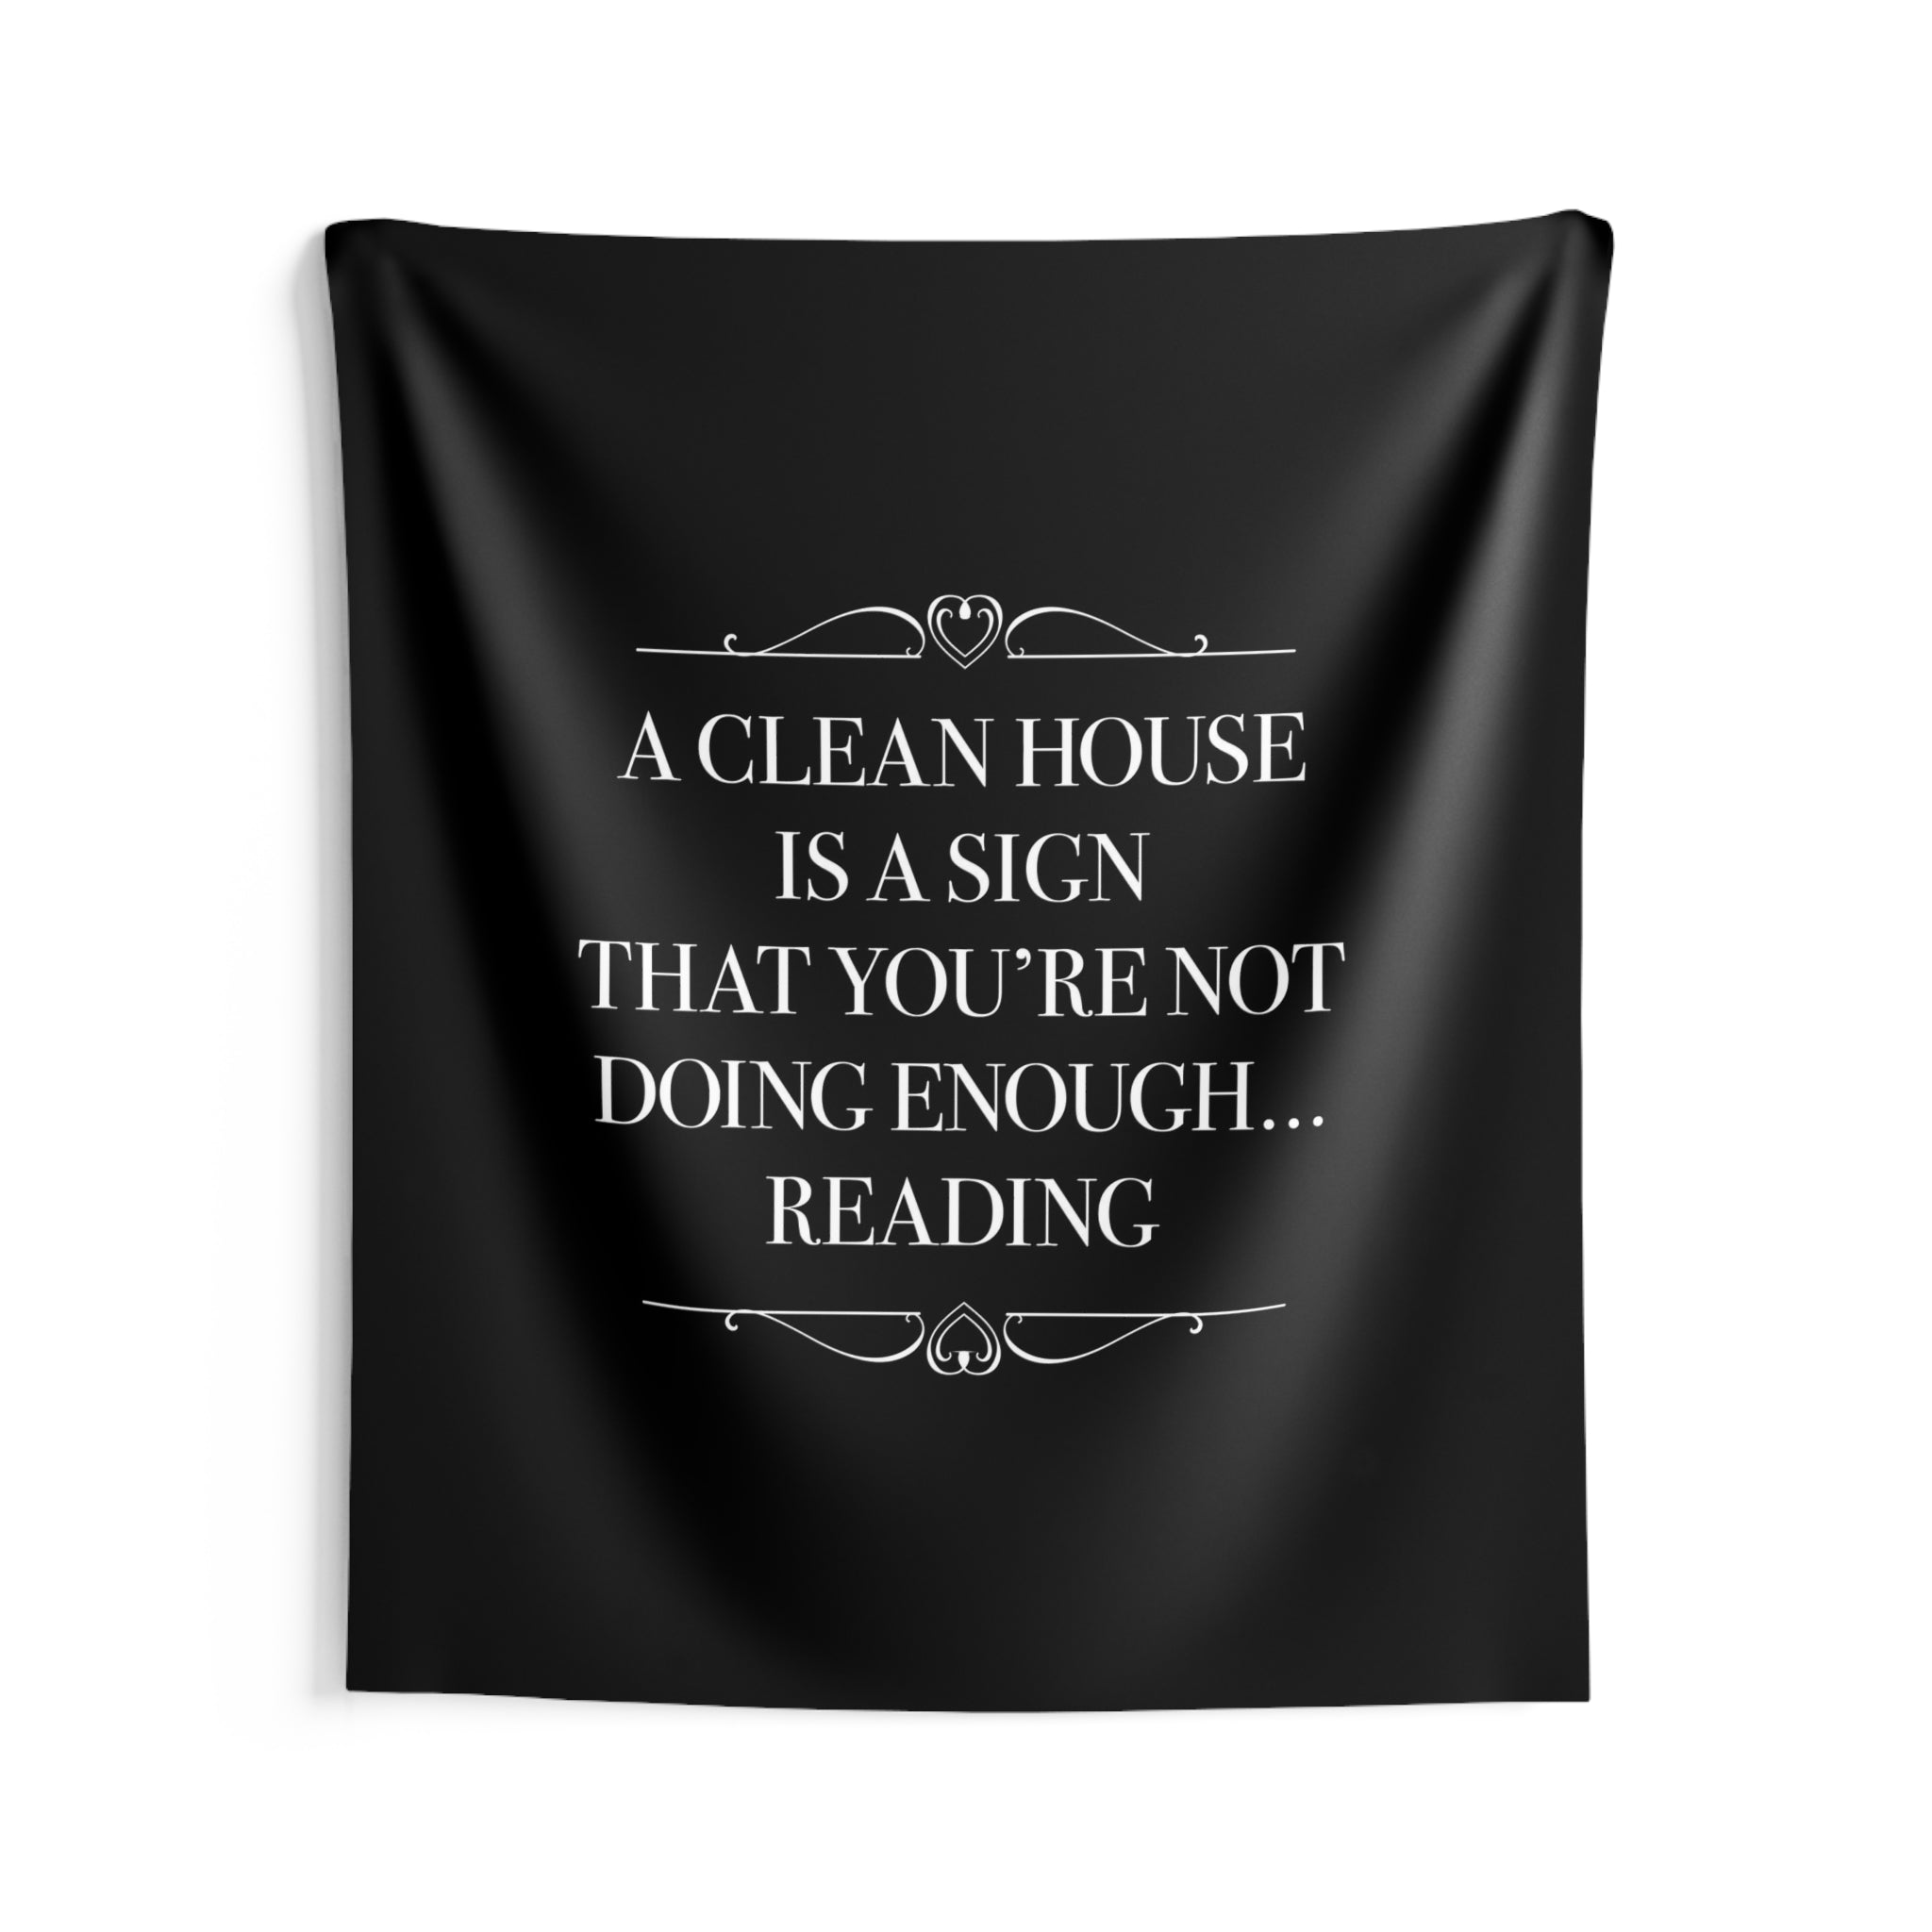 A CLEAN HOUSE IS A SIGN Wall Tapestry - Literary Lifestyle Company